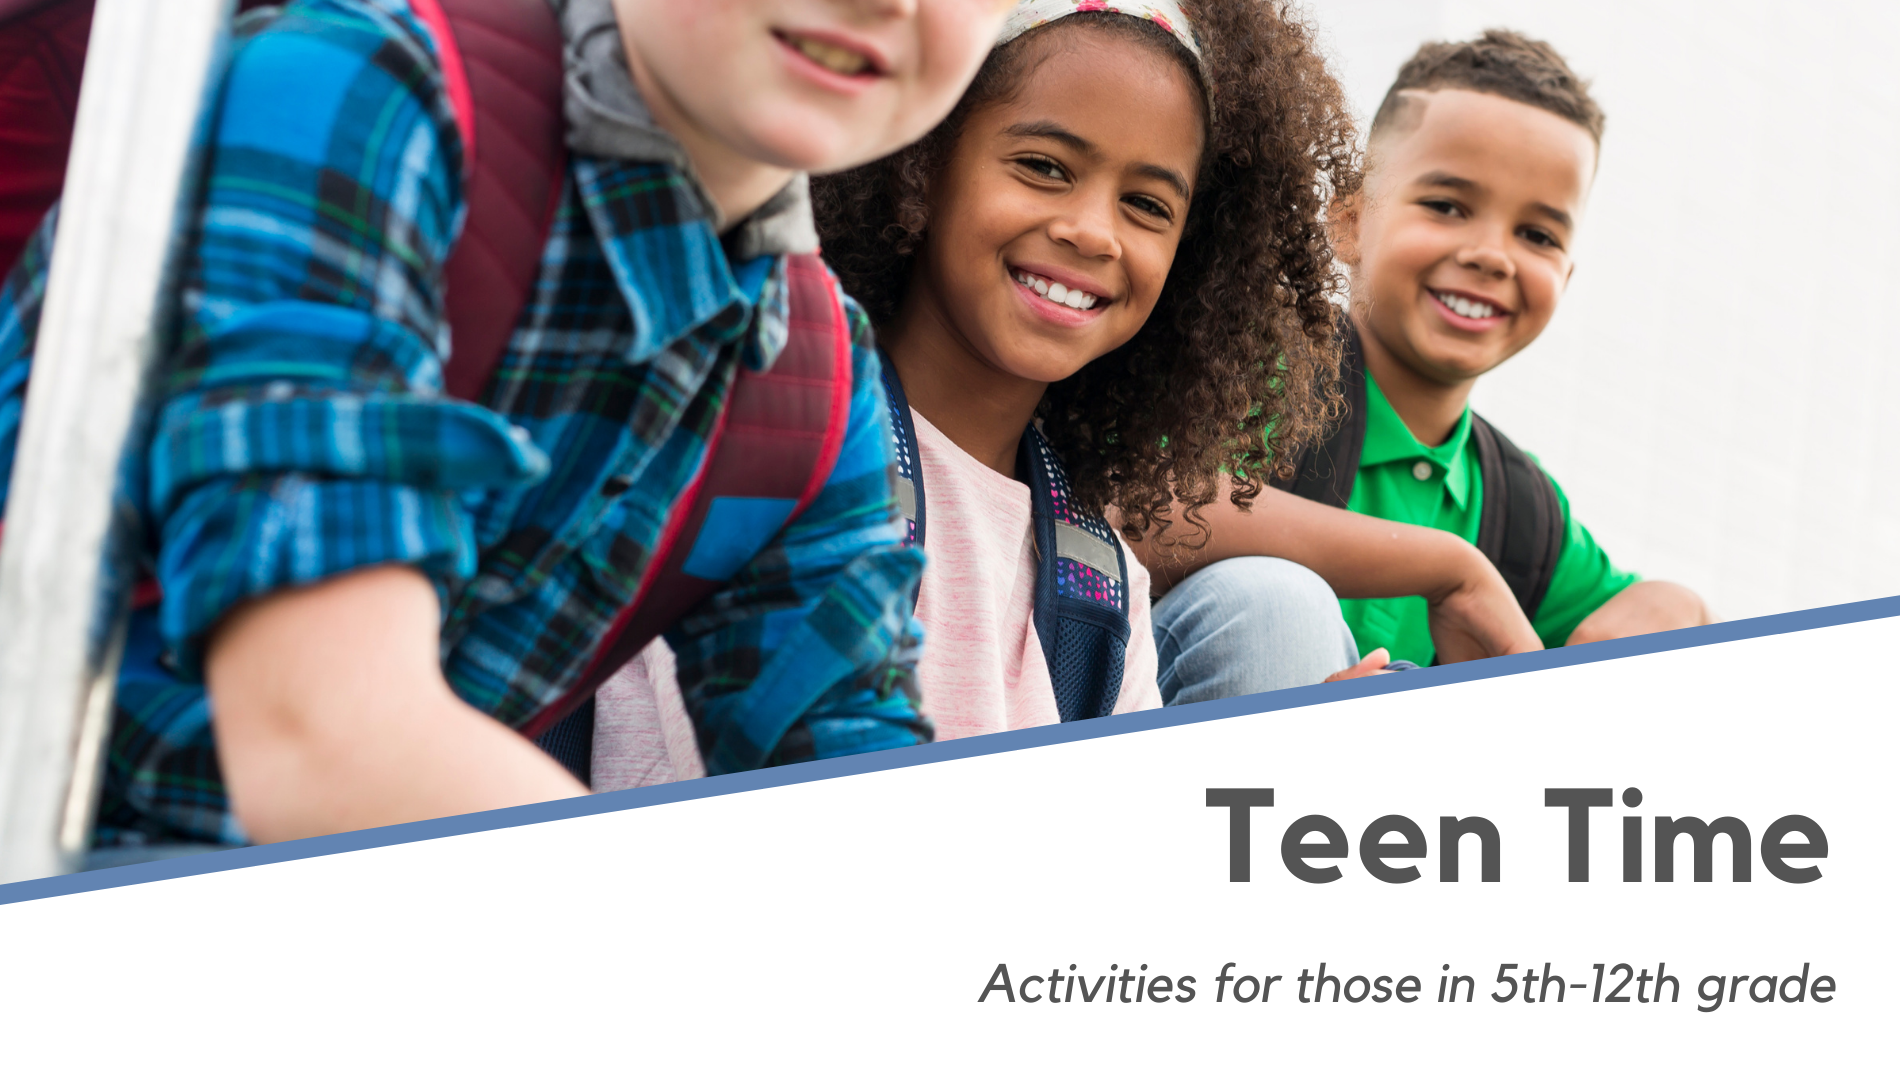 Teen time activities are for those in 5th-12th grade.